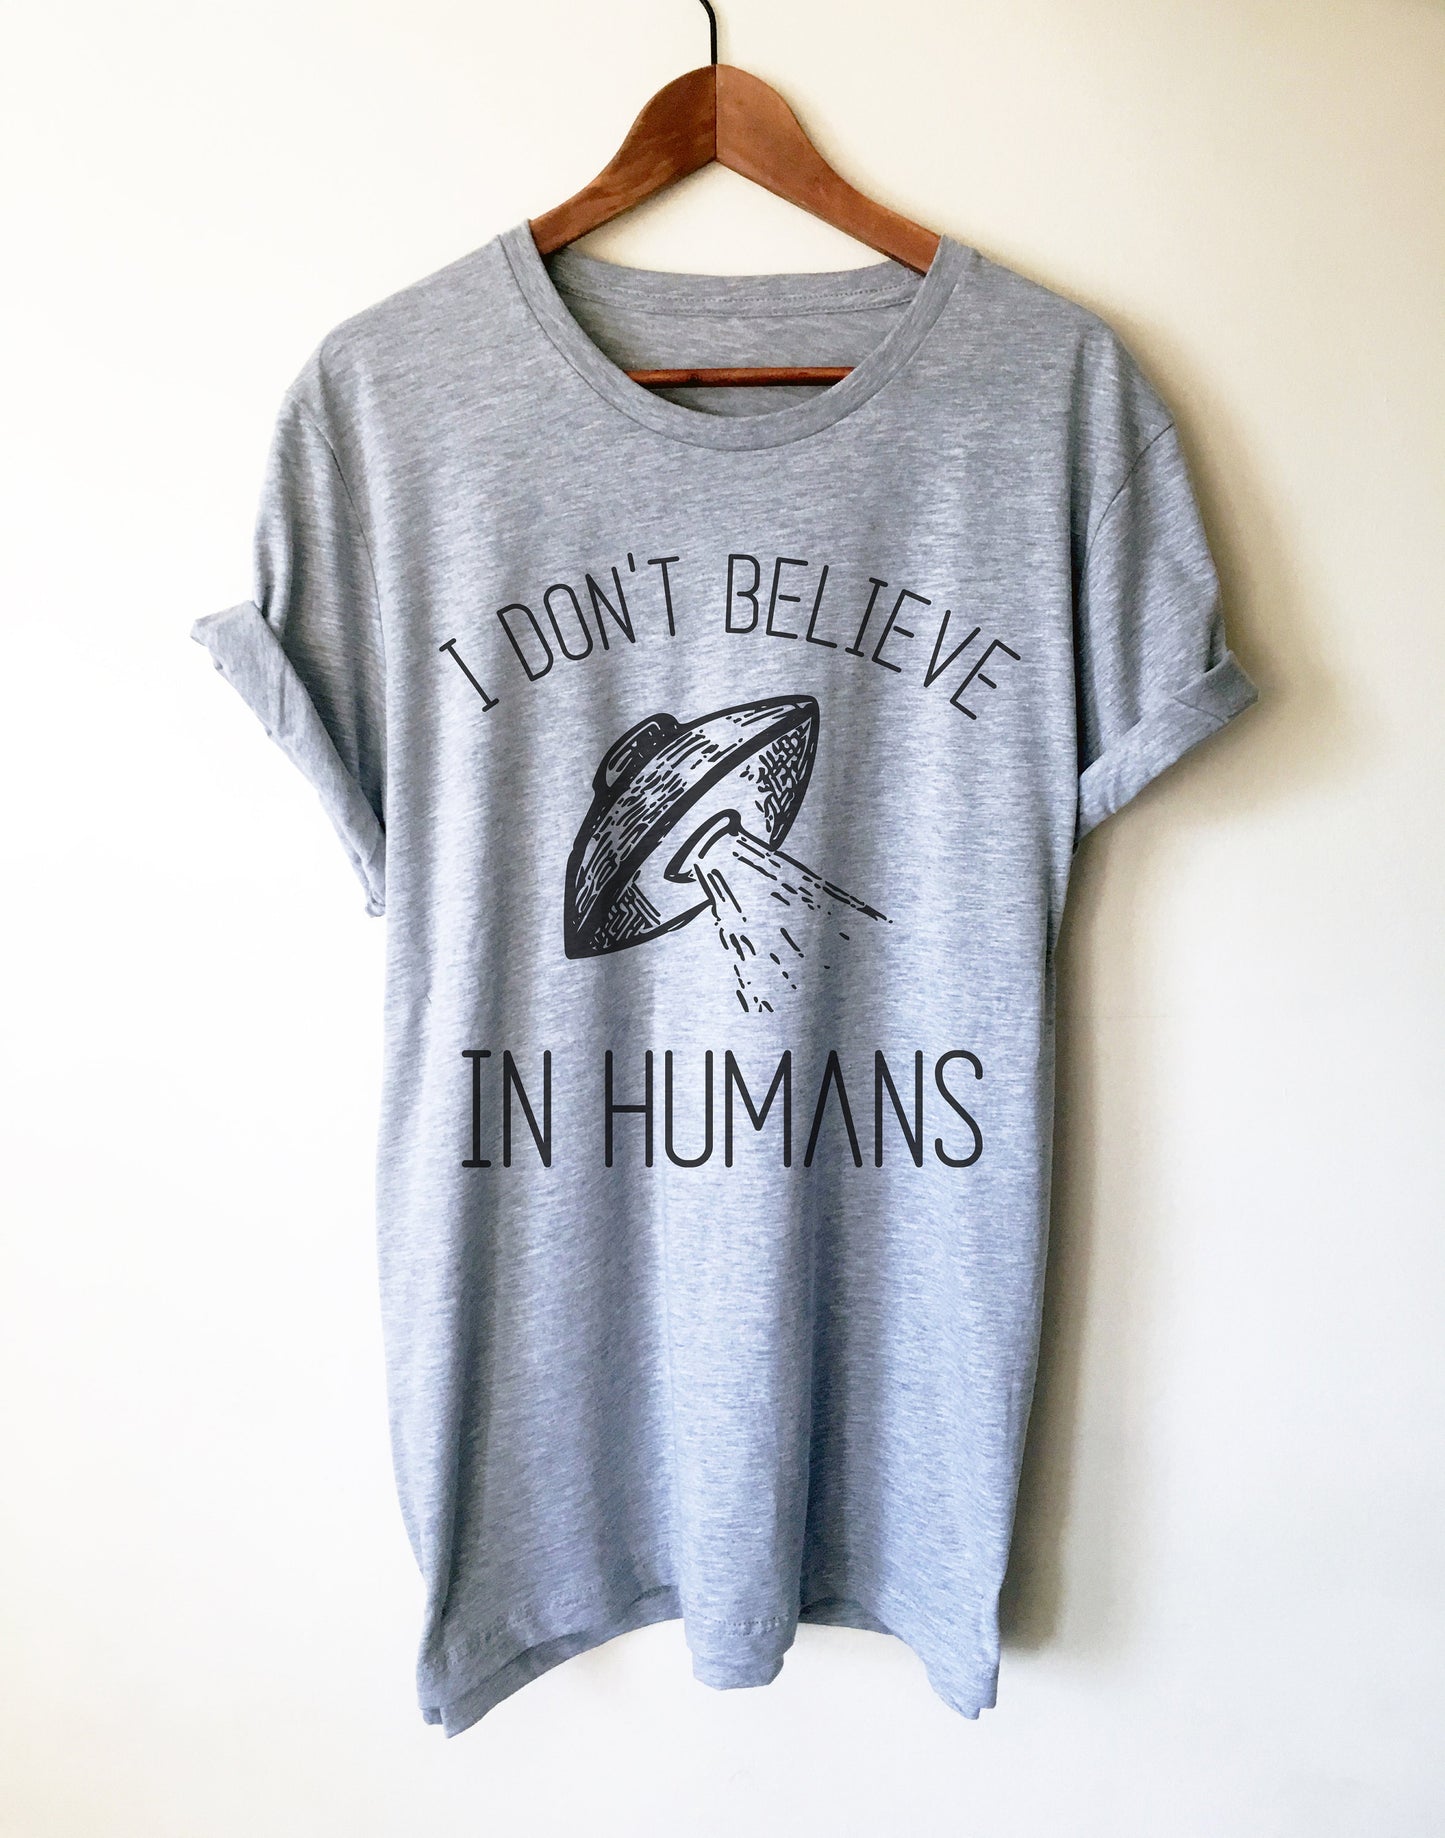 I Don't Believe In Humans Unisex Shirt - Alien Shirt, Alien Gift, Space Shirt, Space Gift, UFO Shirt, Alien T Shirt, Outer Space, UFO Gift